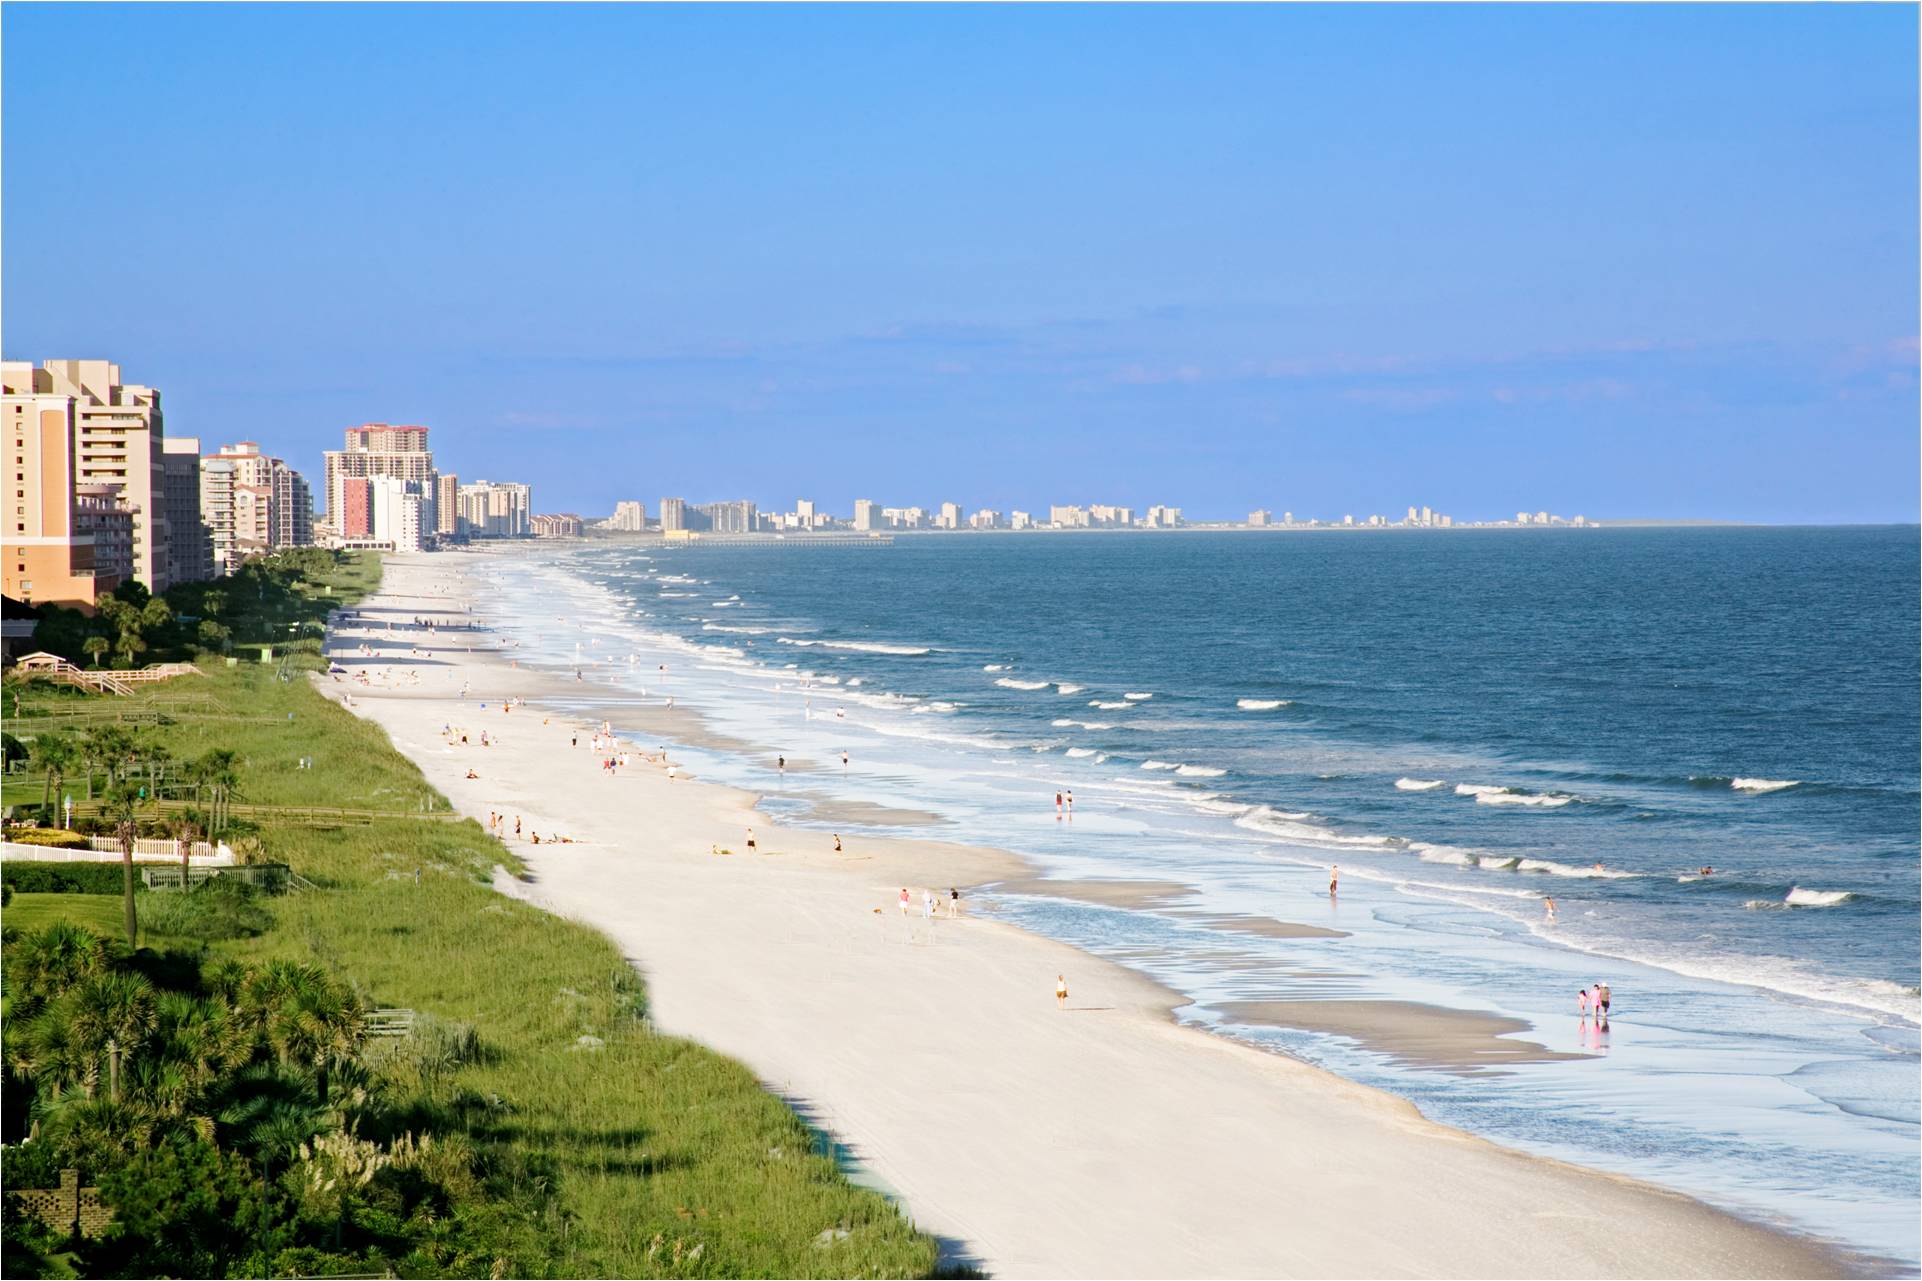 Myrtle Beach Real Estate - Myrtle Beach Real Estate For Sale Home and